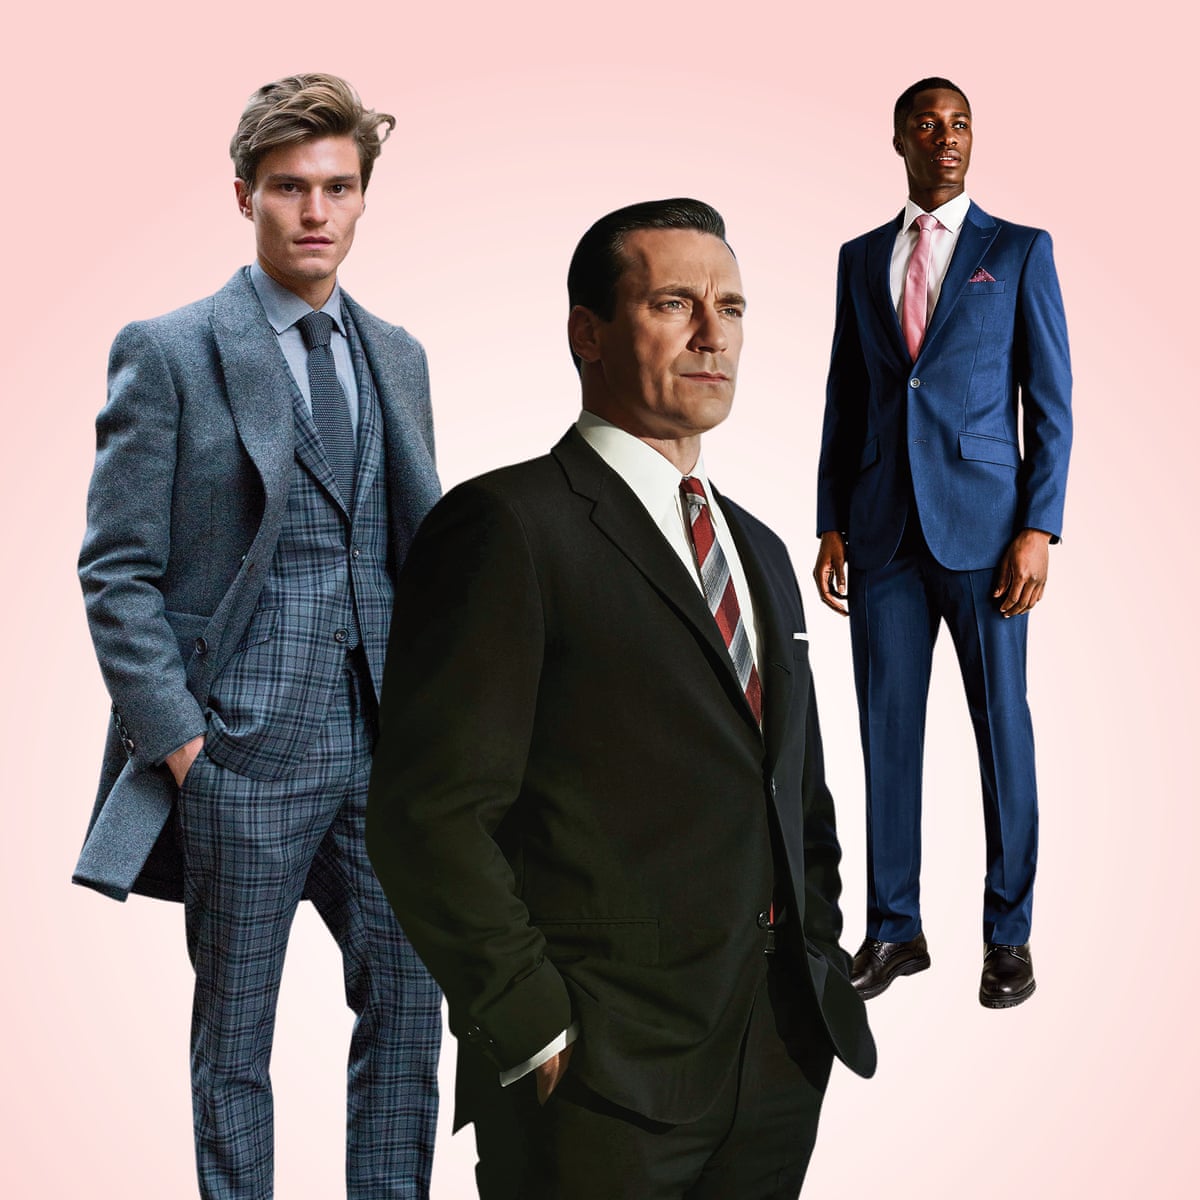 The end of the suit: has Covid finished off the menswear staple